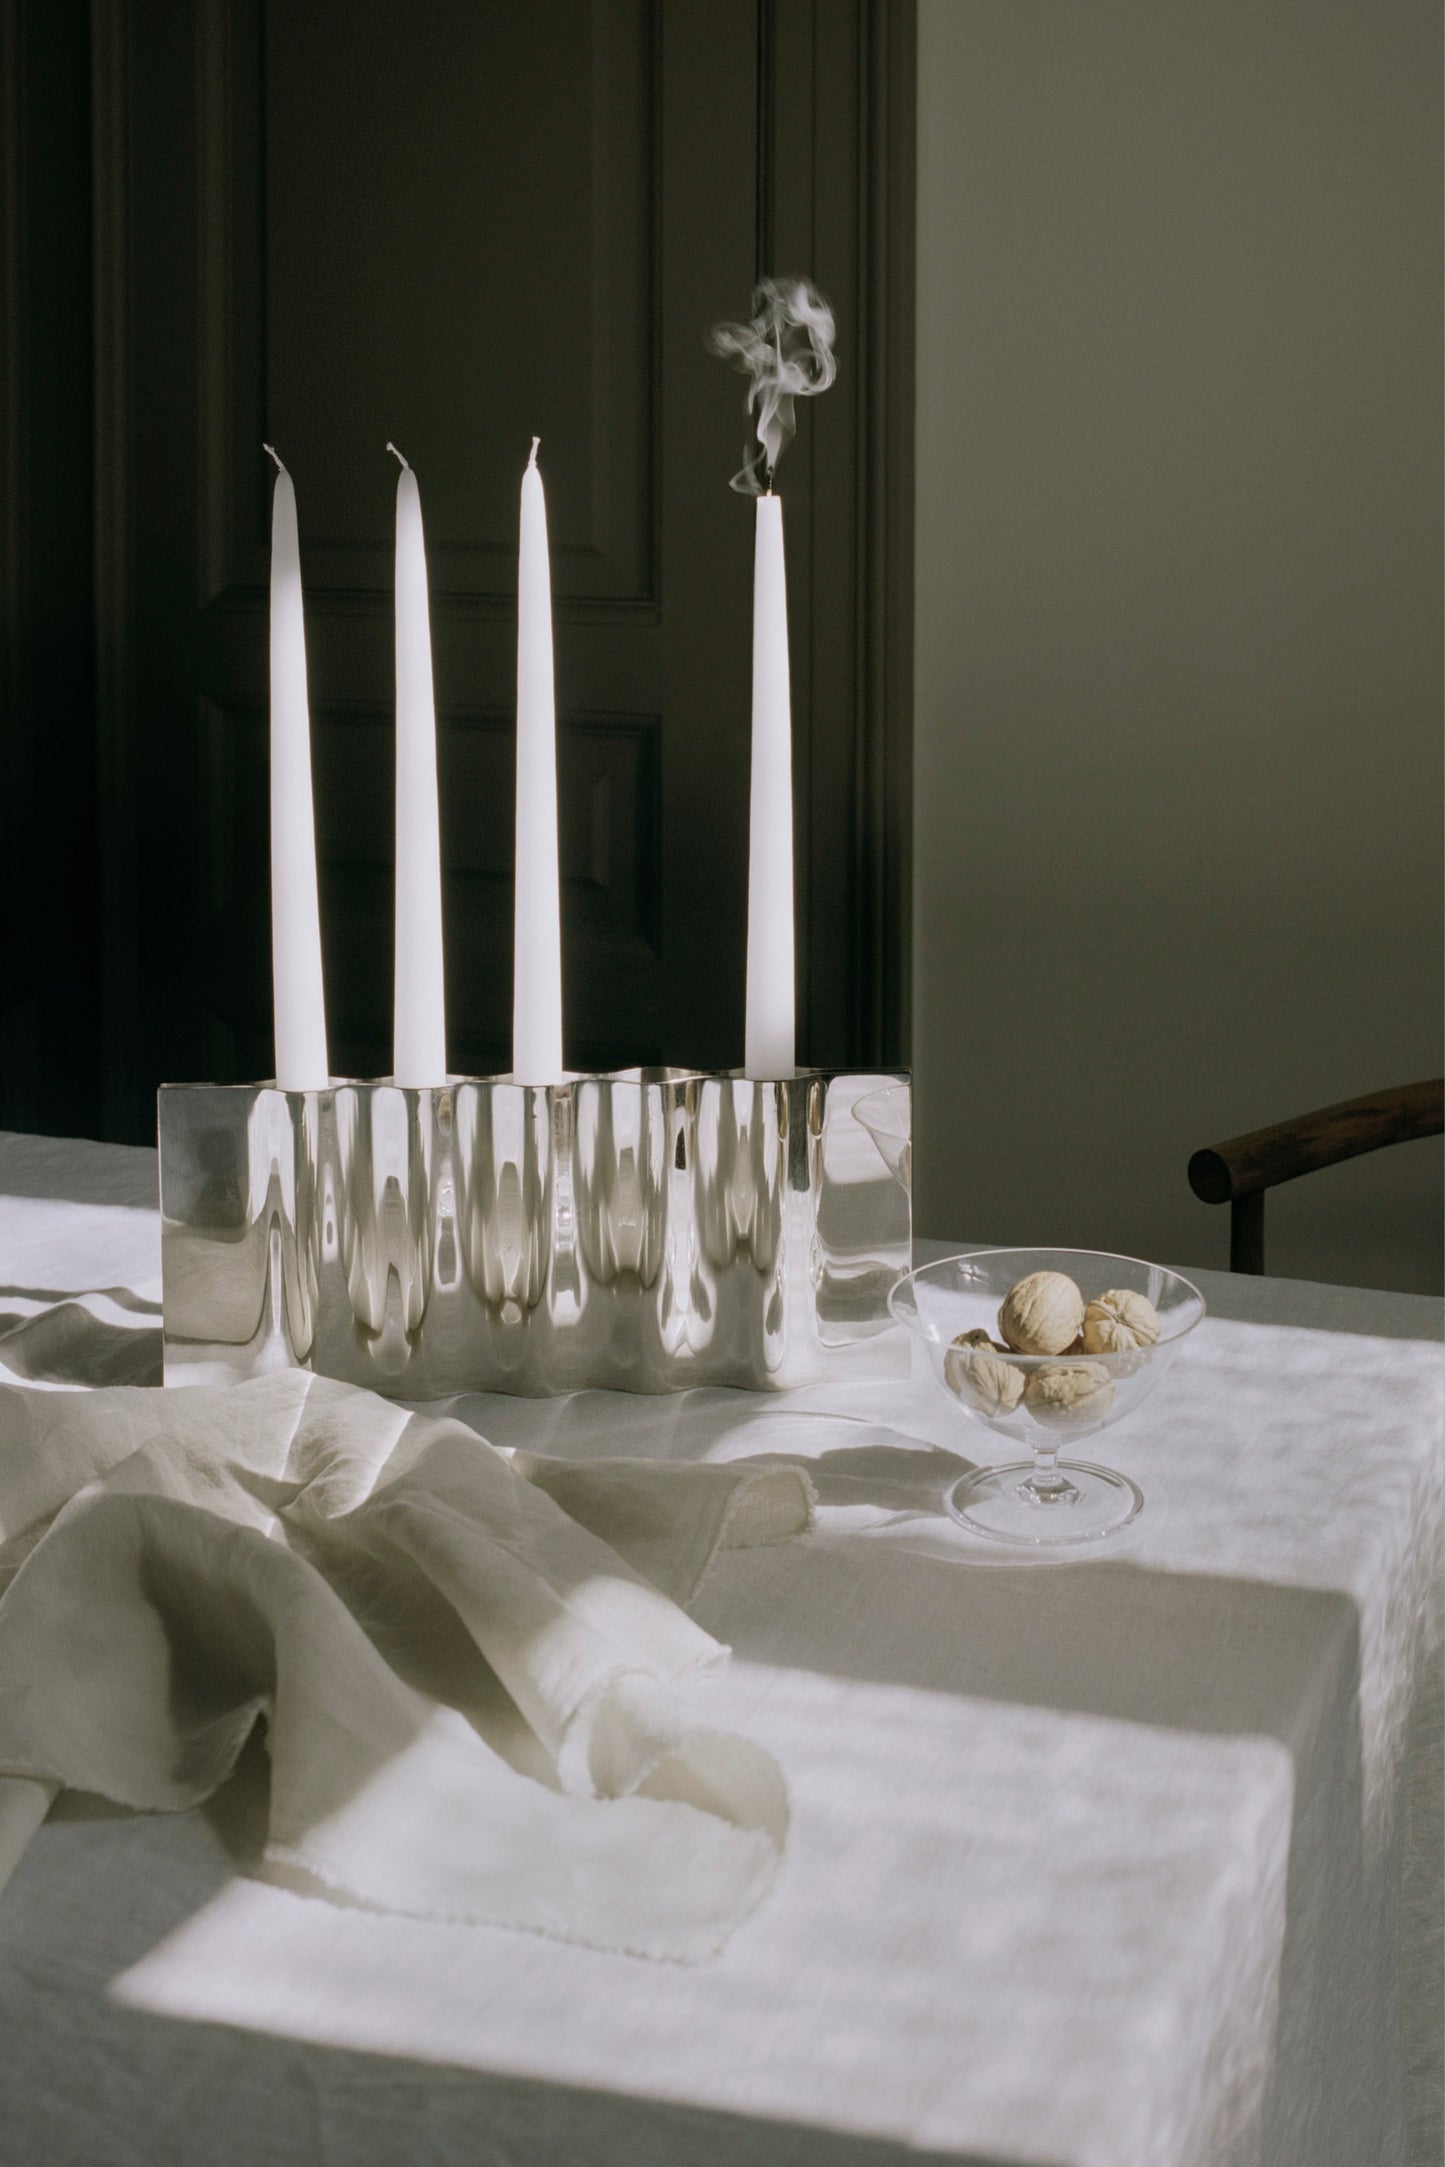 Ripply Candle Holder from New Works, by designer Cristián Mohaded as table decoration